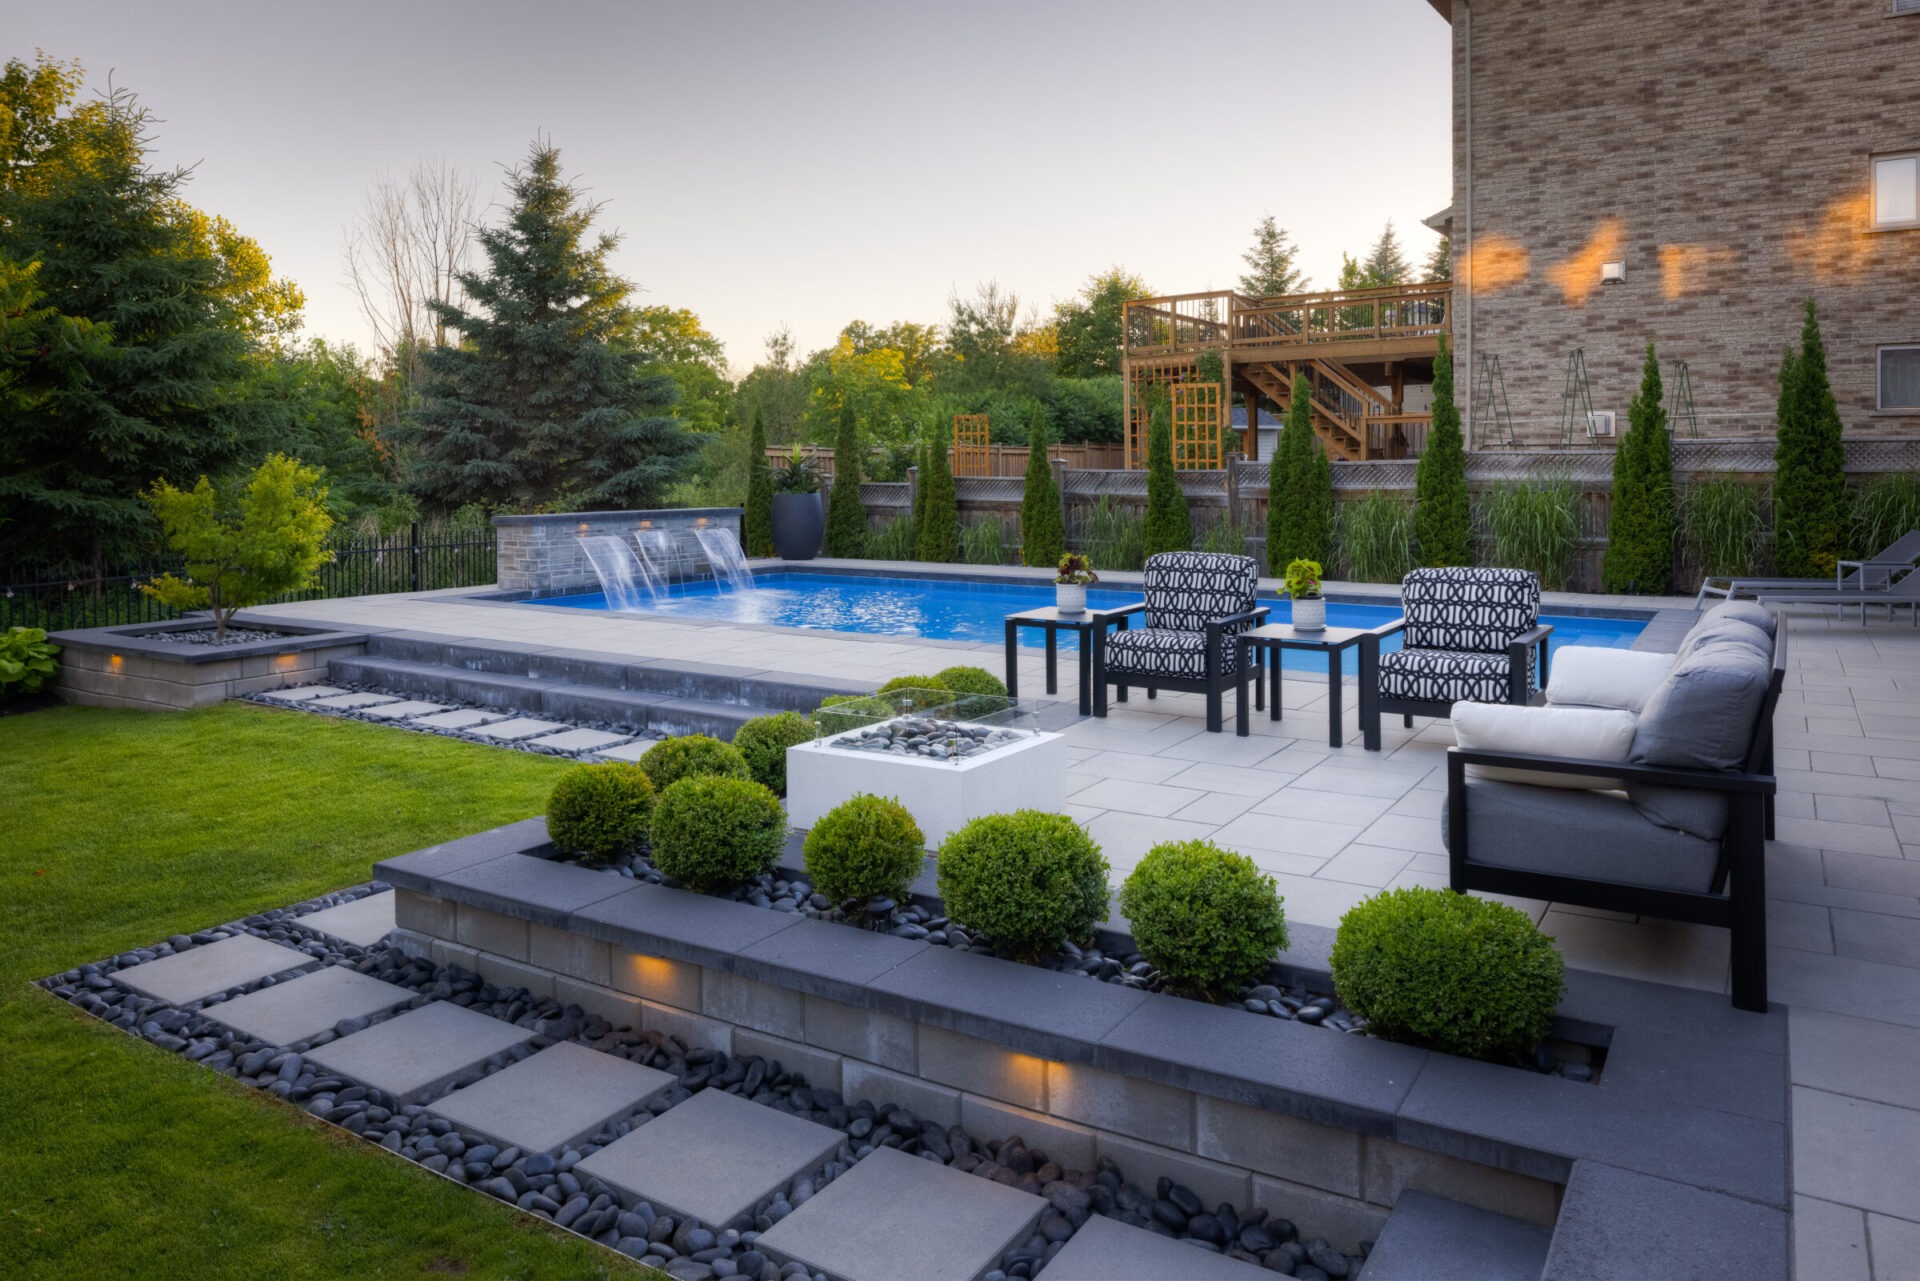 An elegant backyard with a swimming pool, waterfall, patio furniture, manicured shrubs, and stepping stones, surrounded by trees and a wooden deck.